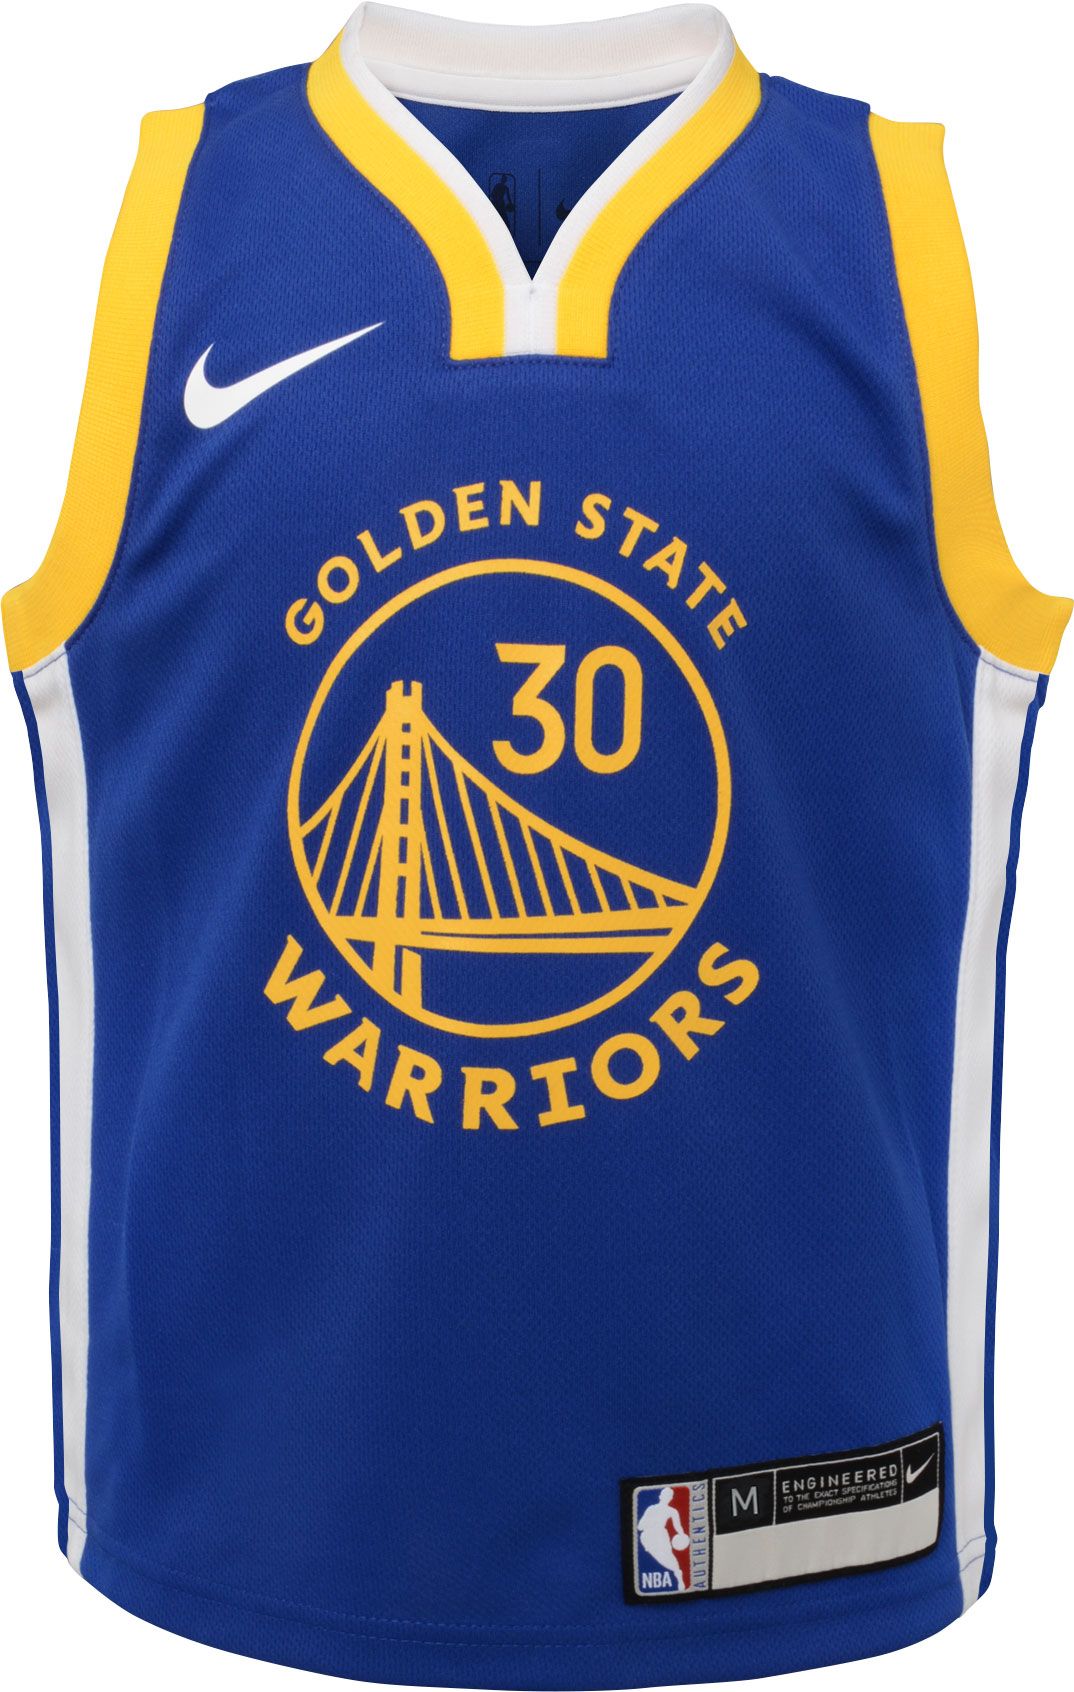 Men's Nike Stephen Curry Royal Golden State Warriors Icon 2022/23 Name and Number Performance T-Shir Blue/Yellow